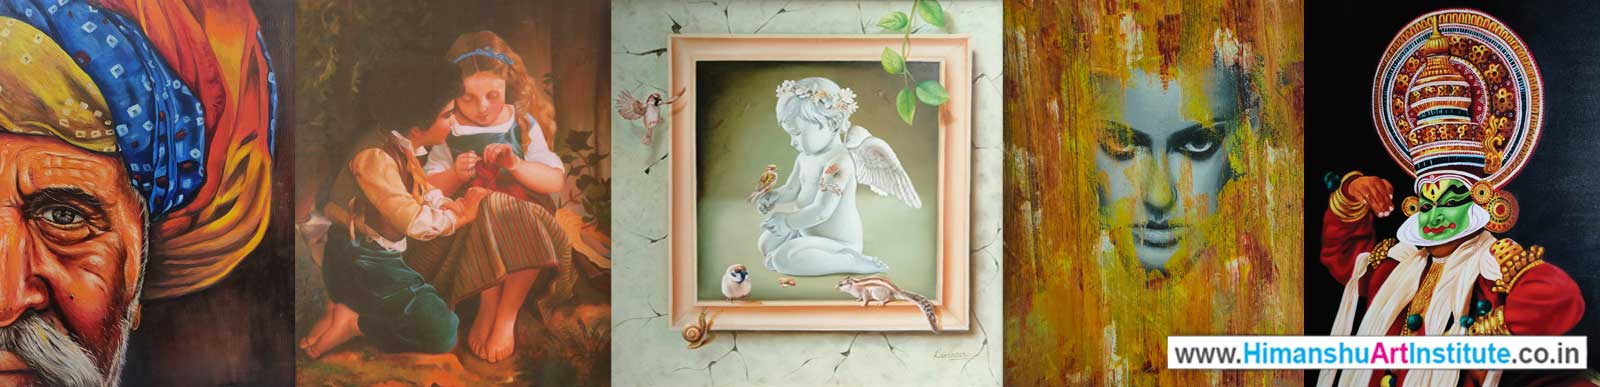 Oil Painting, Acrylic Painting Classes in Delhi, India